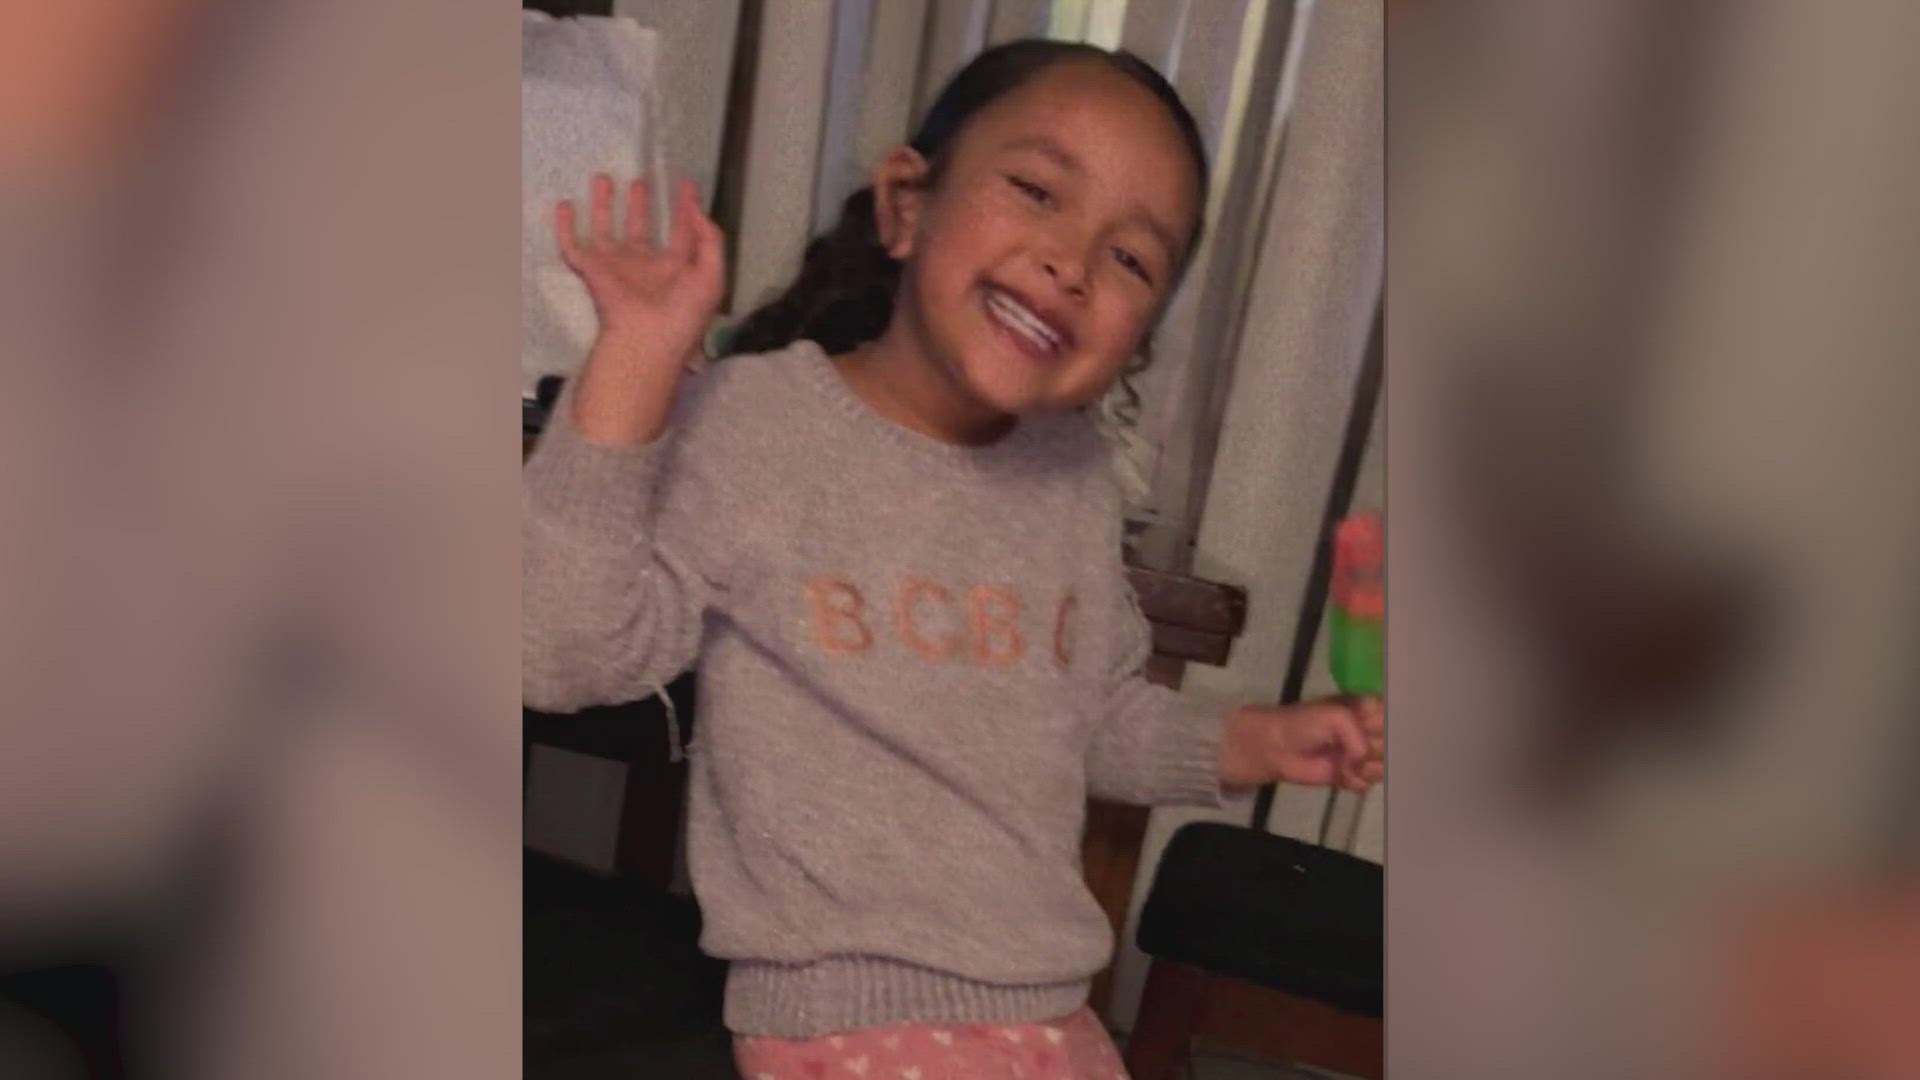 $5k reward offered to locate suspects who shot, killed 4-year-old girl